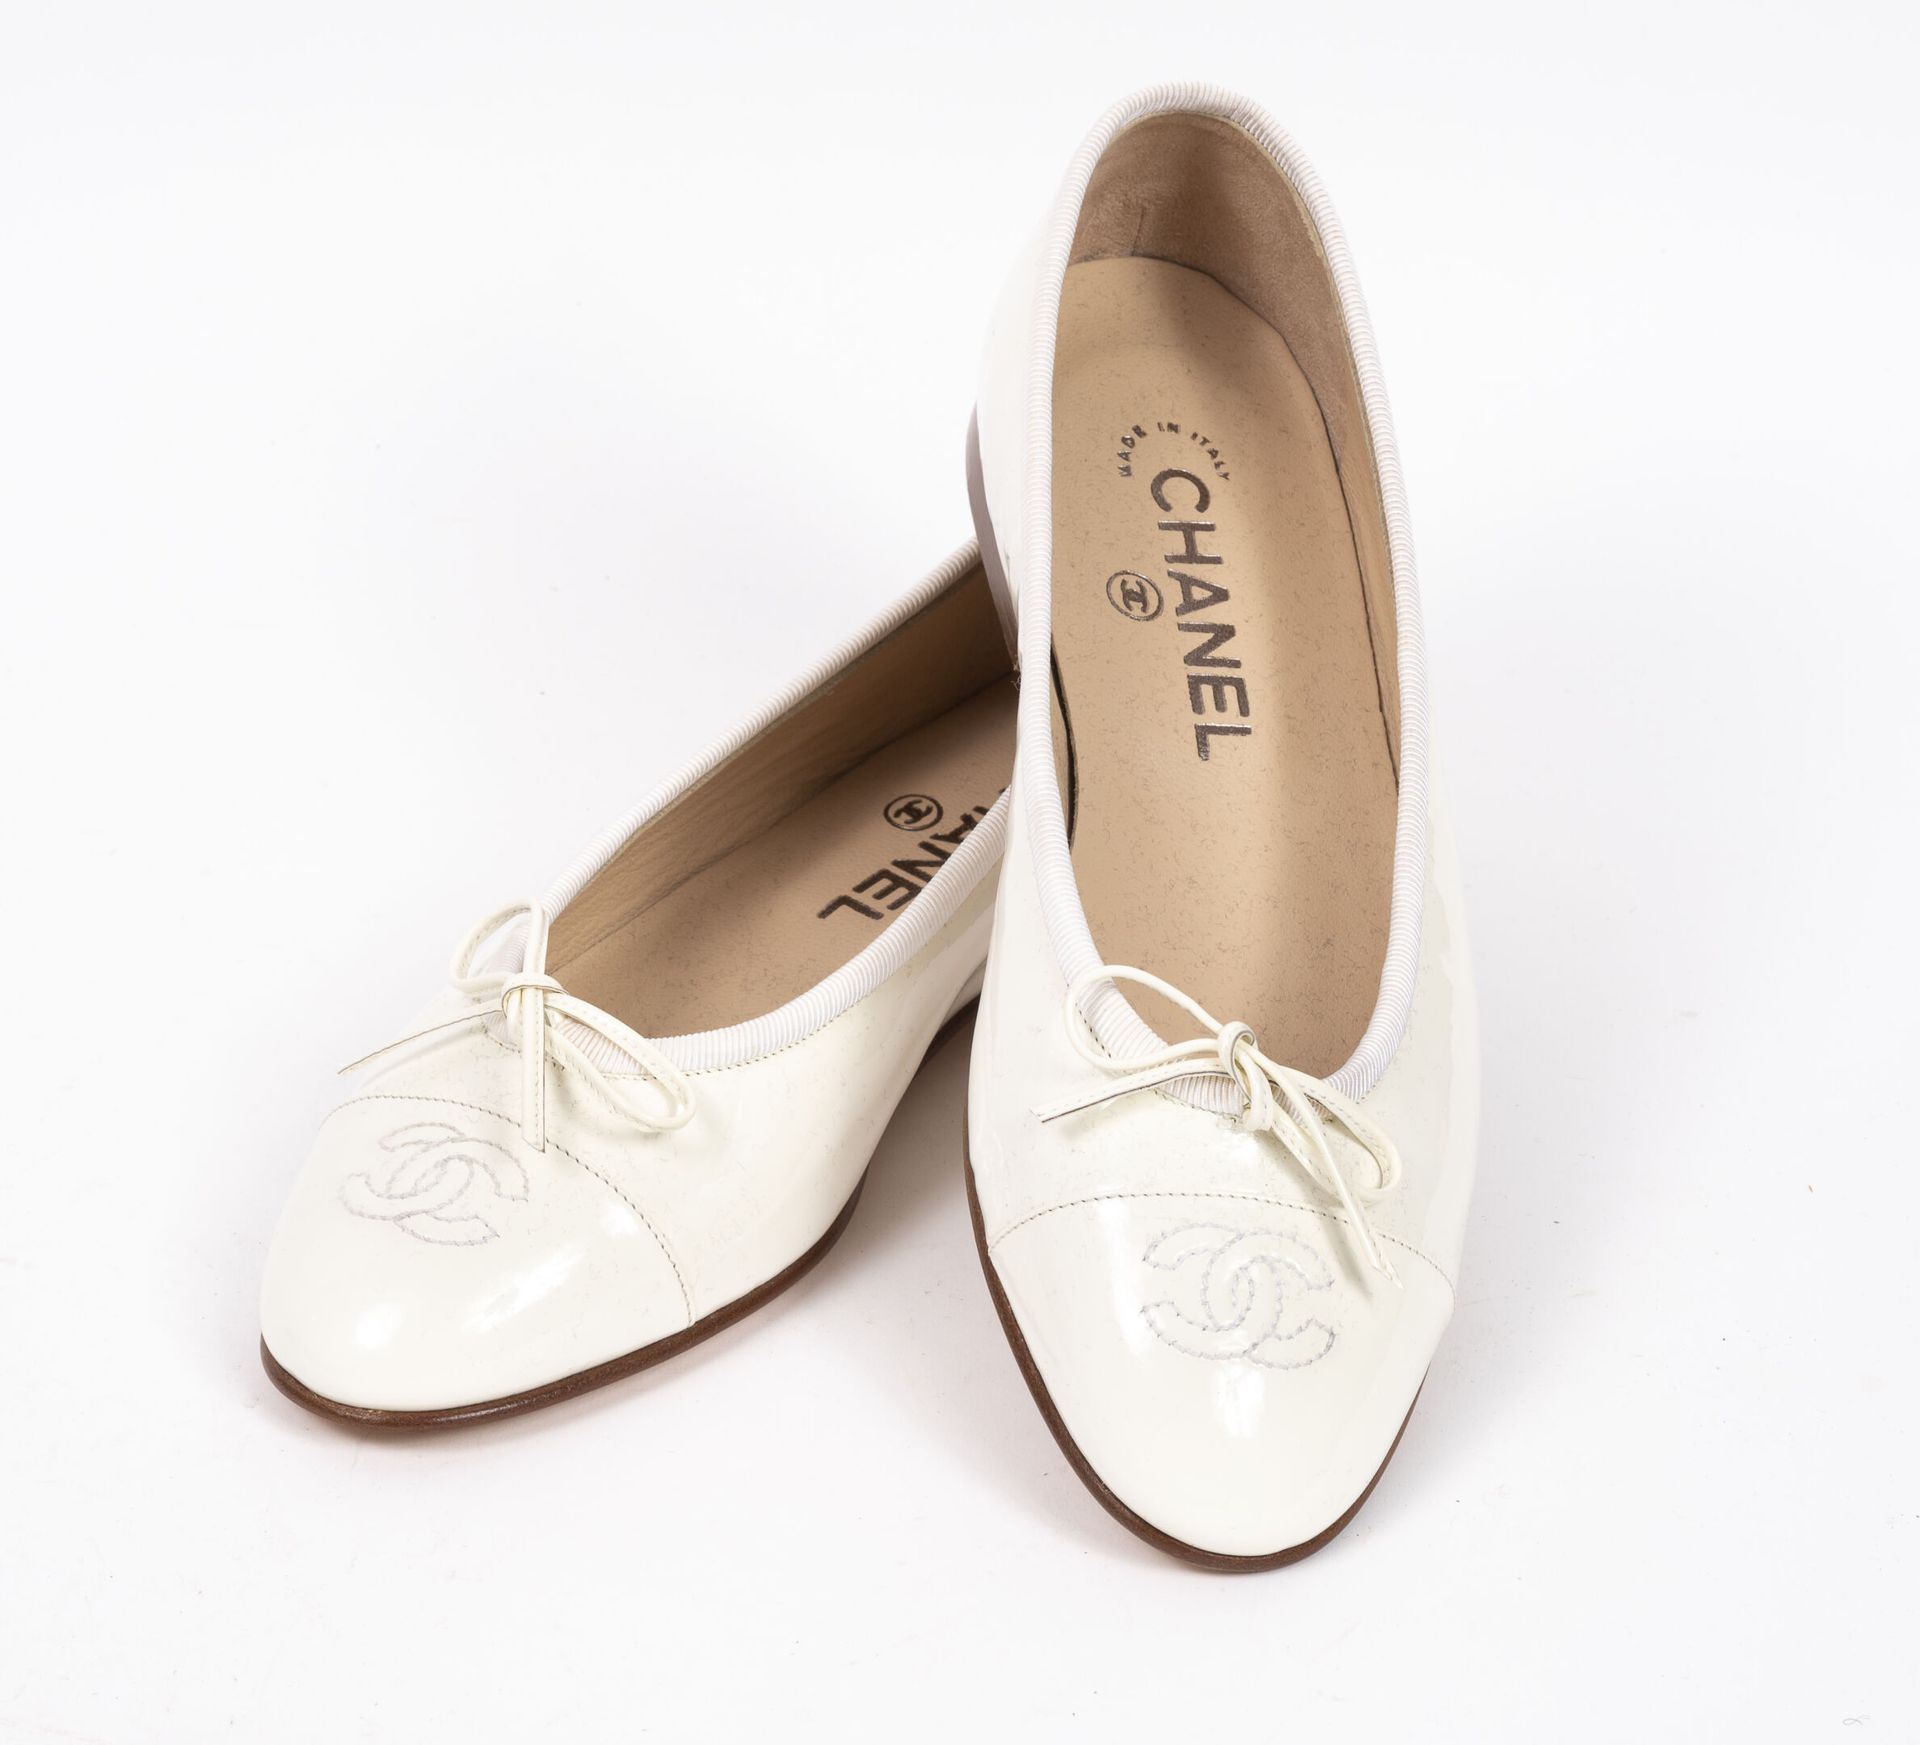 Pair of ballerinas in ivory patent leather, round toe wi…